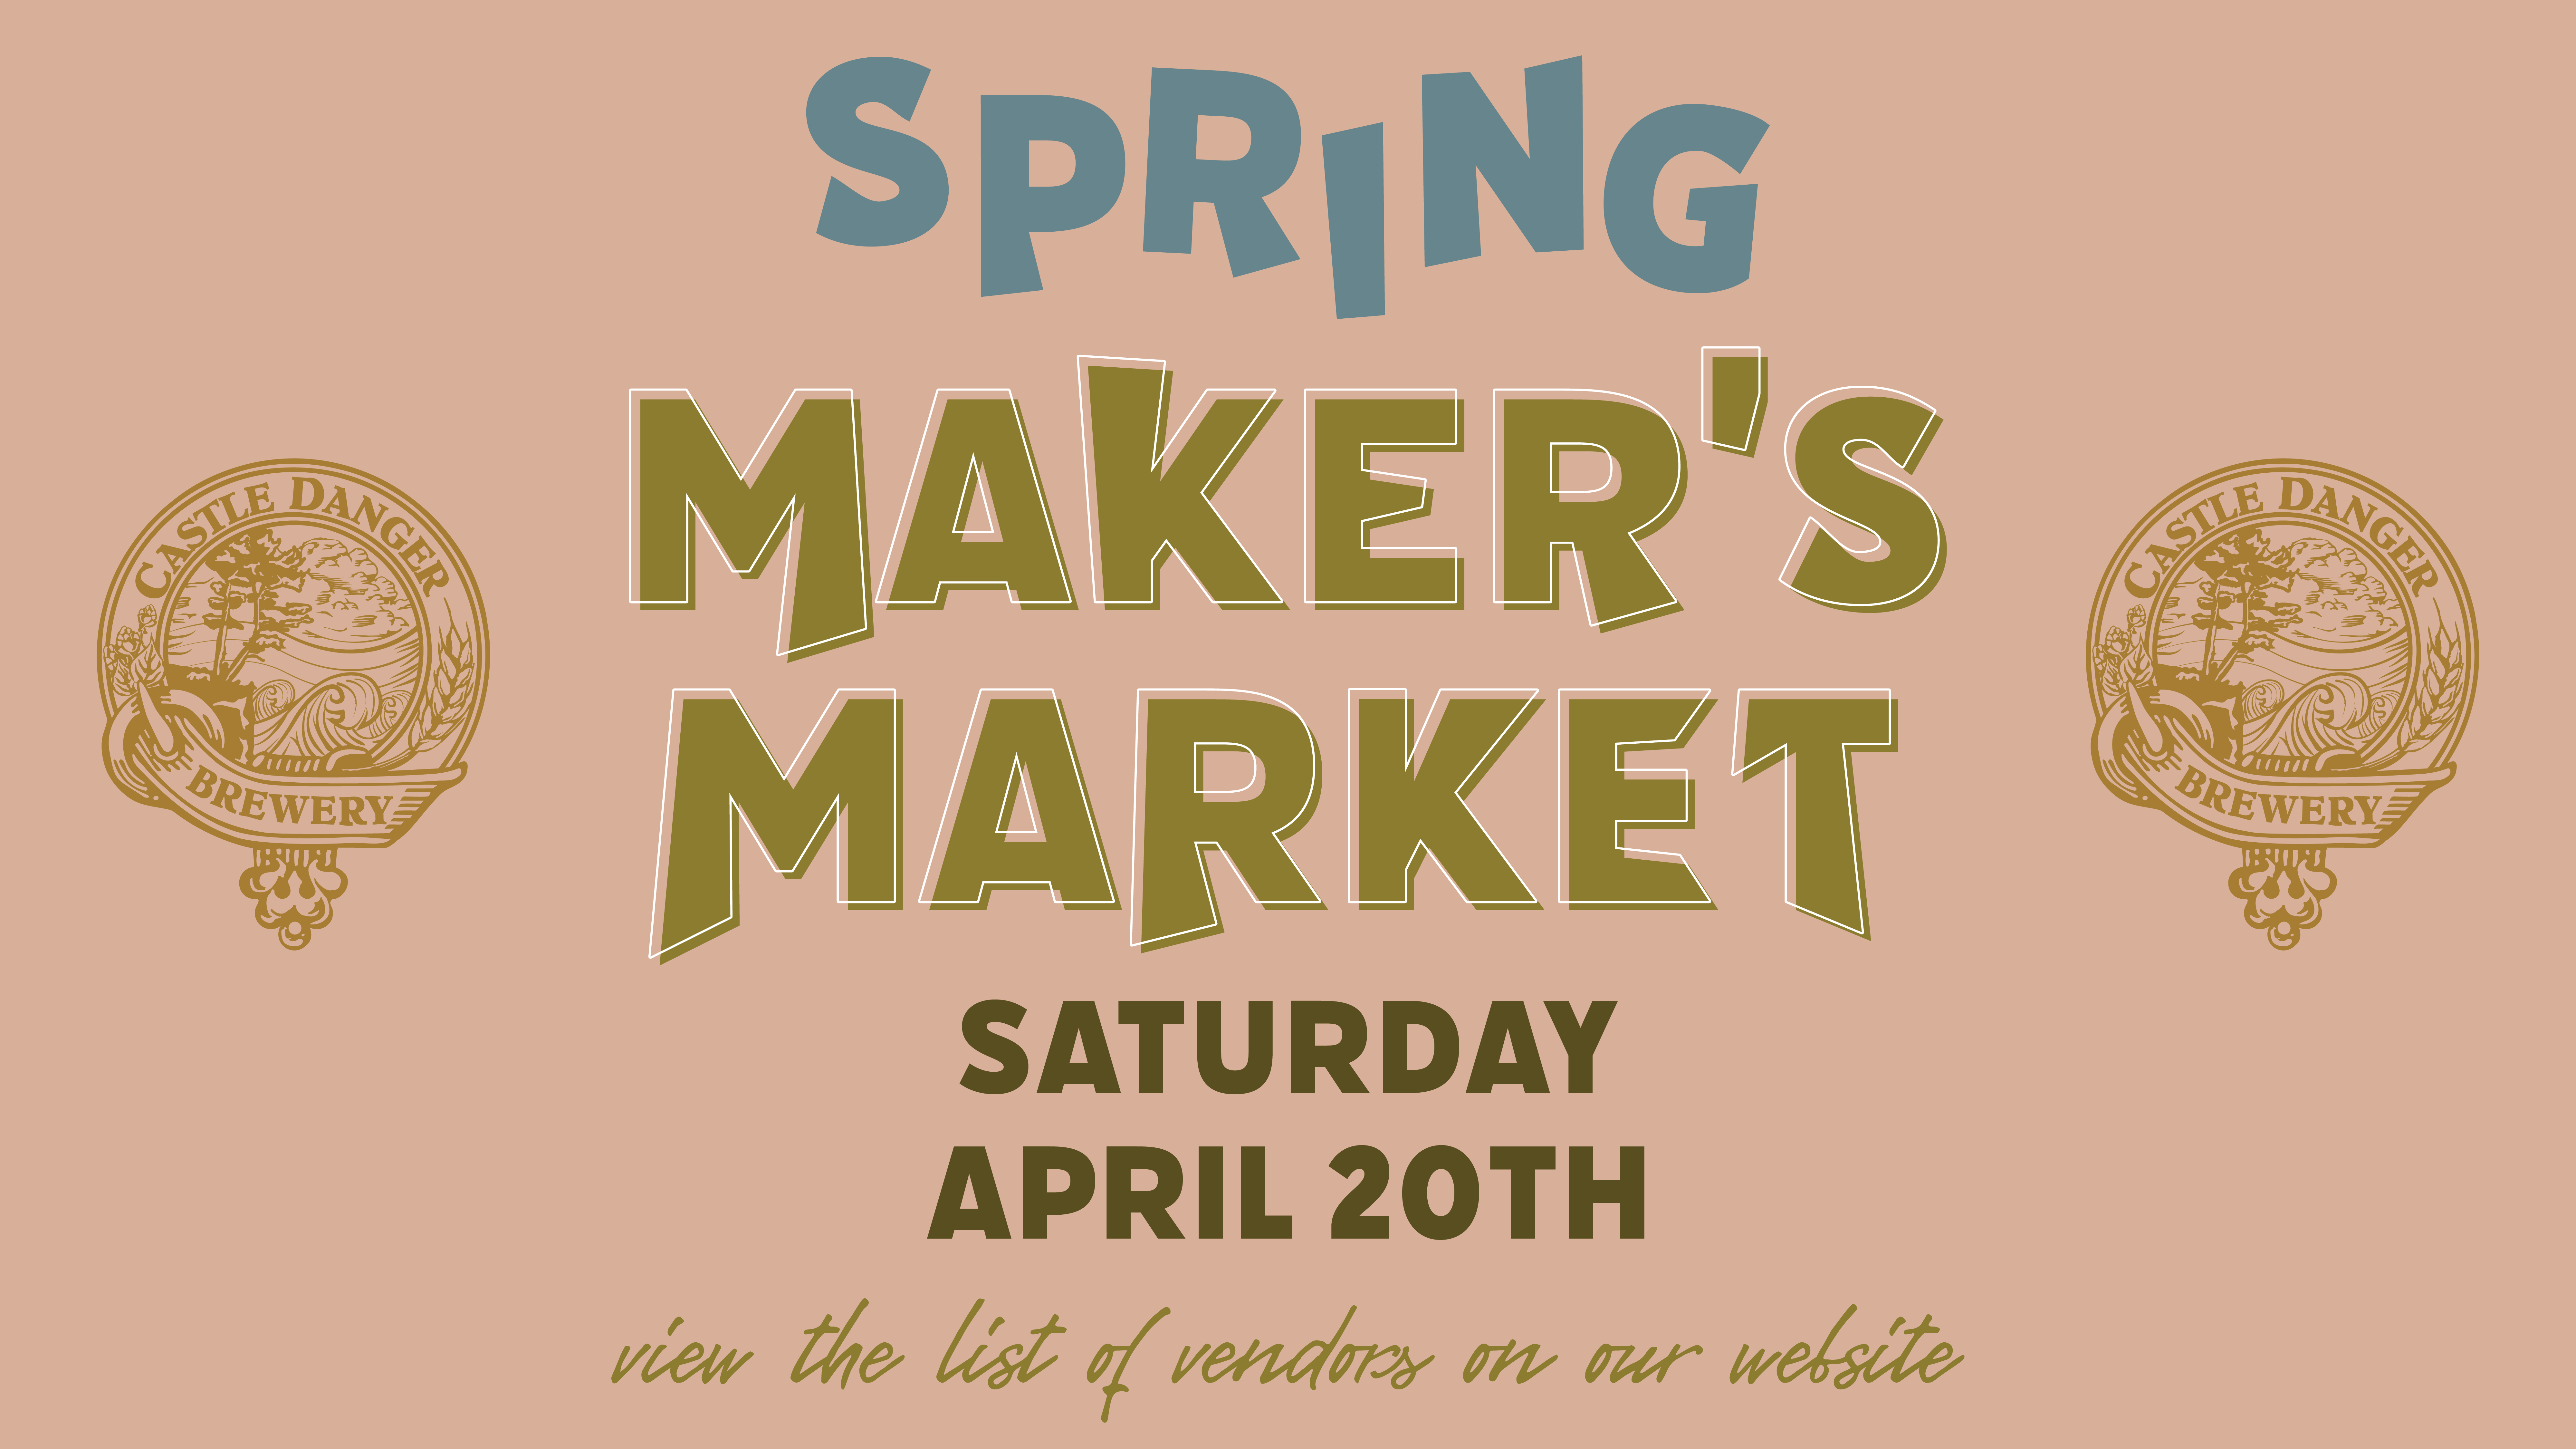 Spring Makers Market happening on Saturday, April 20th from 12-5pm on our patio